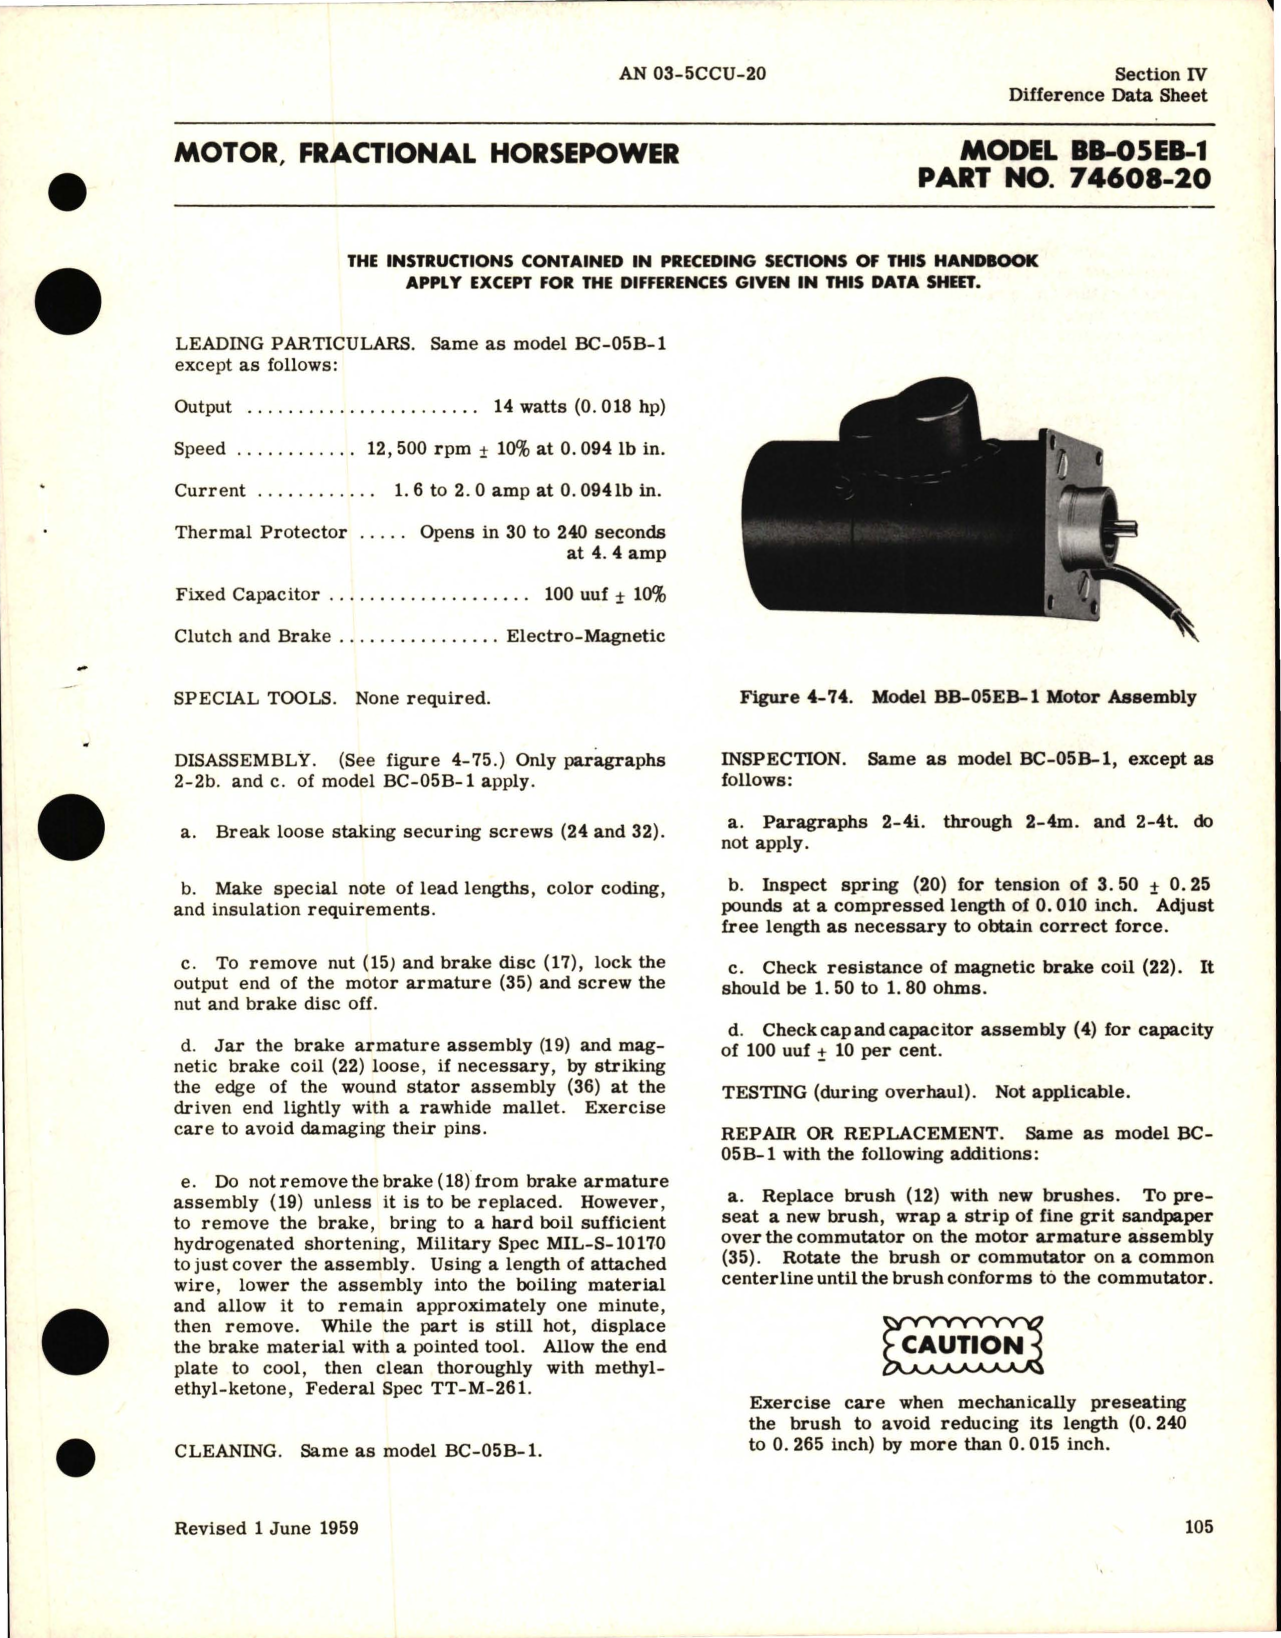 Sample page 5 from AirCorps Library document: Overhaul Instructions for Fractional Horsepower Motors - B Frame Series 